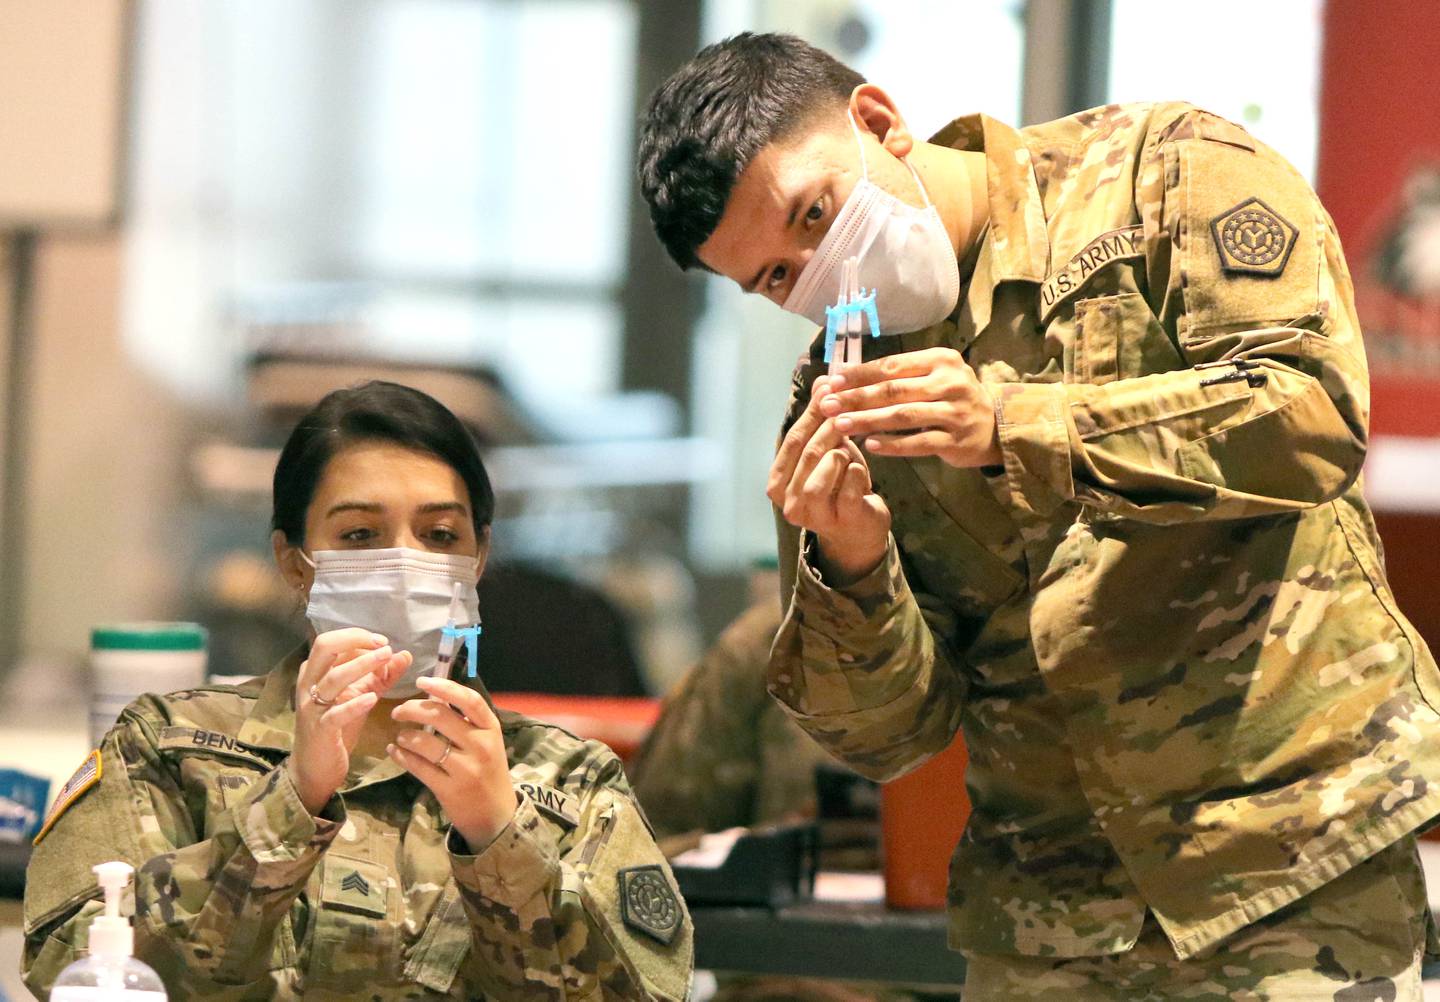 Members of the Illinois National Guard check their COVID-19 vaccines Wednesday at the Convocation Center at Northern Illinois University in DeKalb.